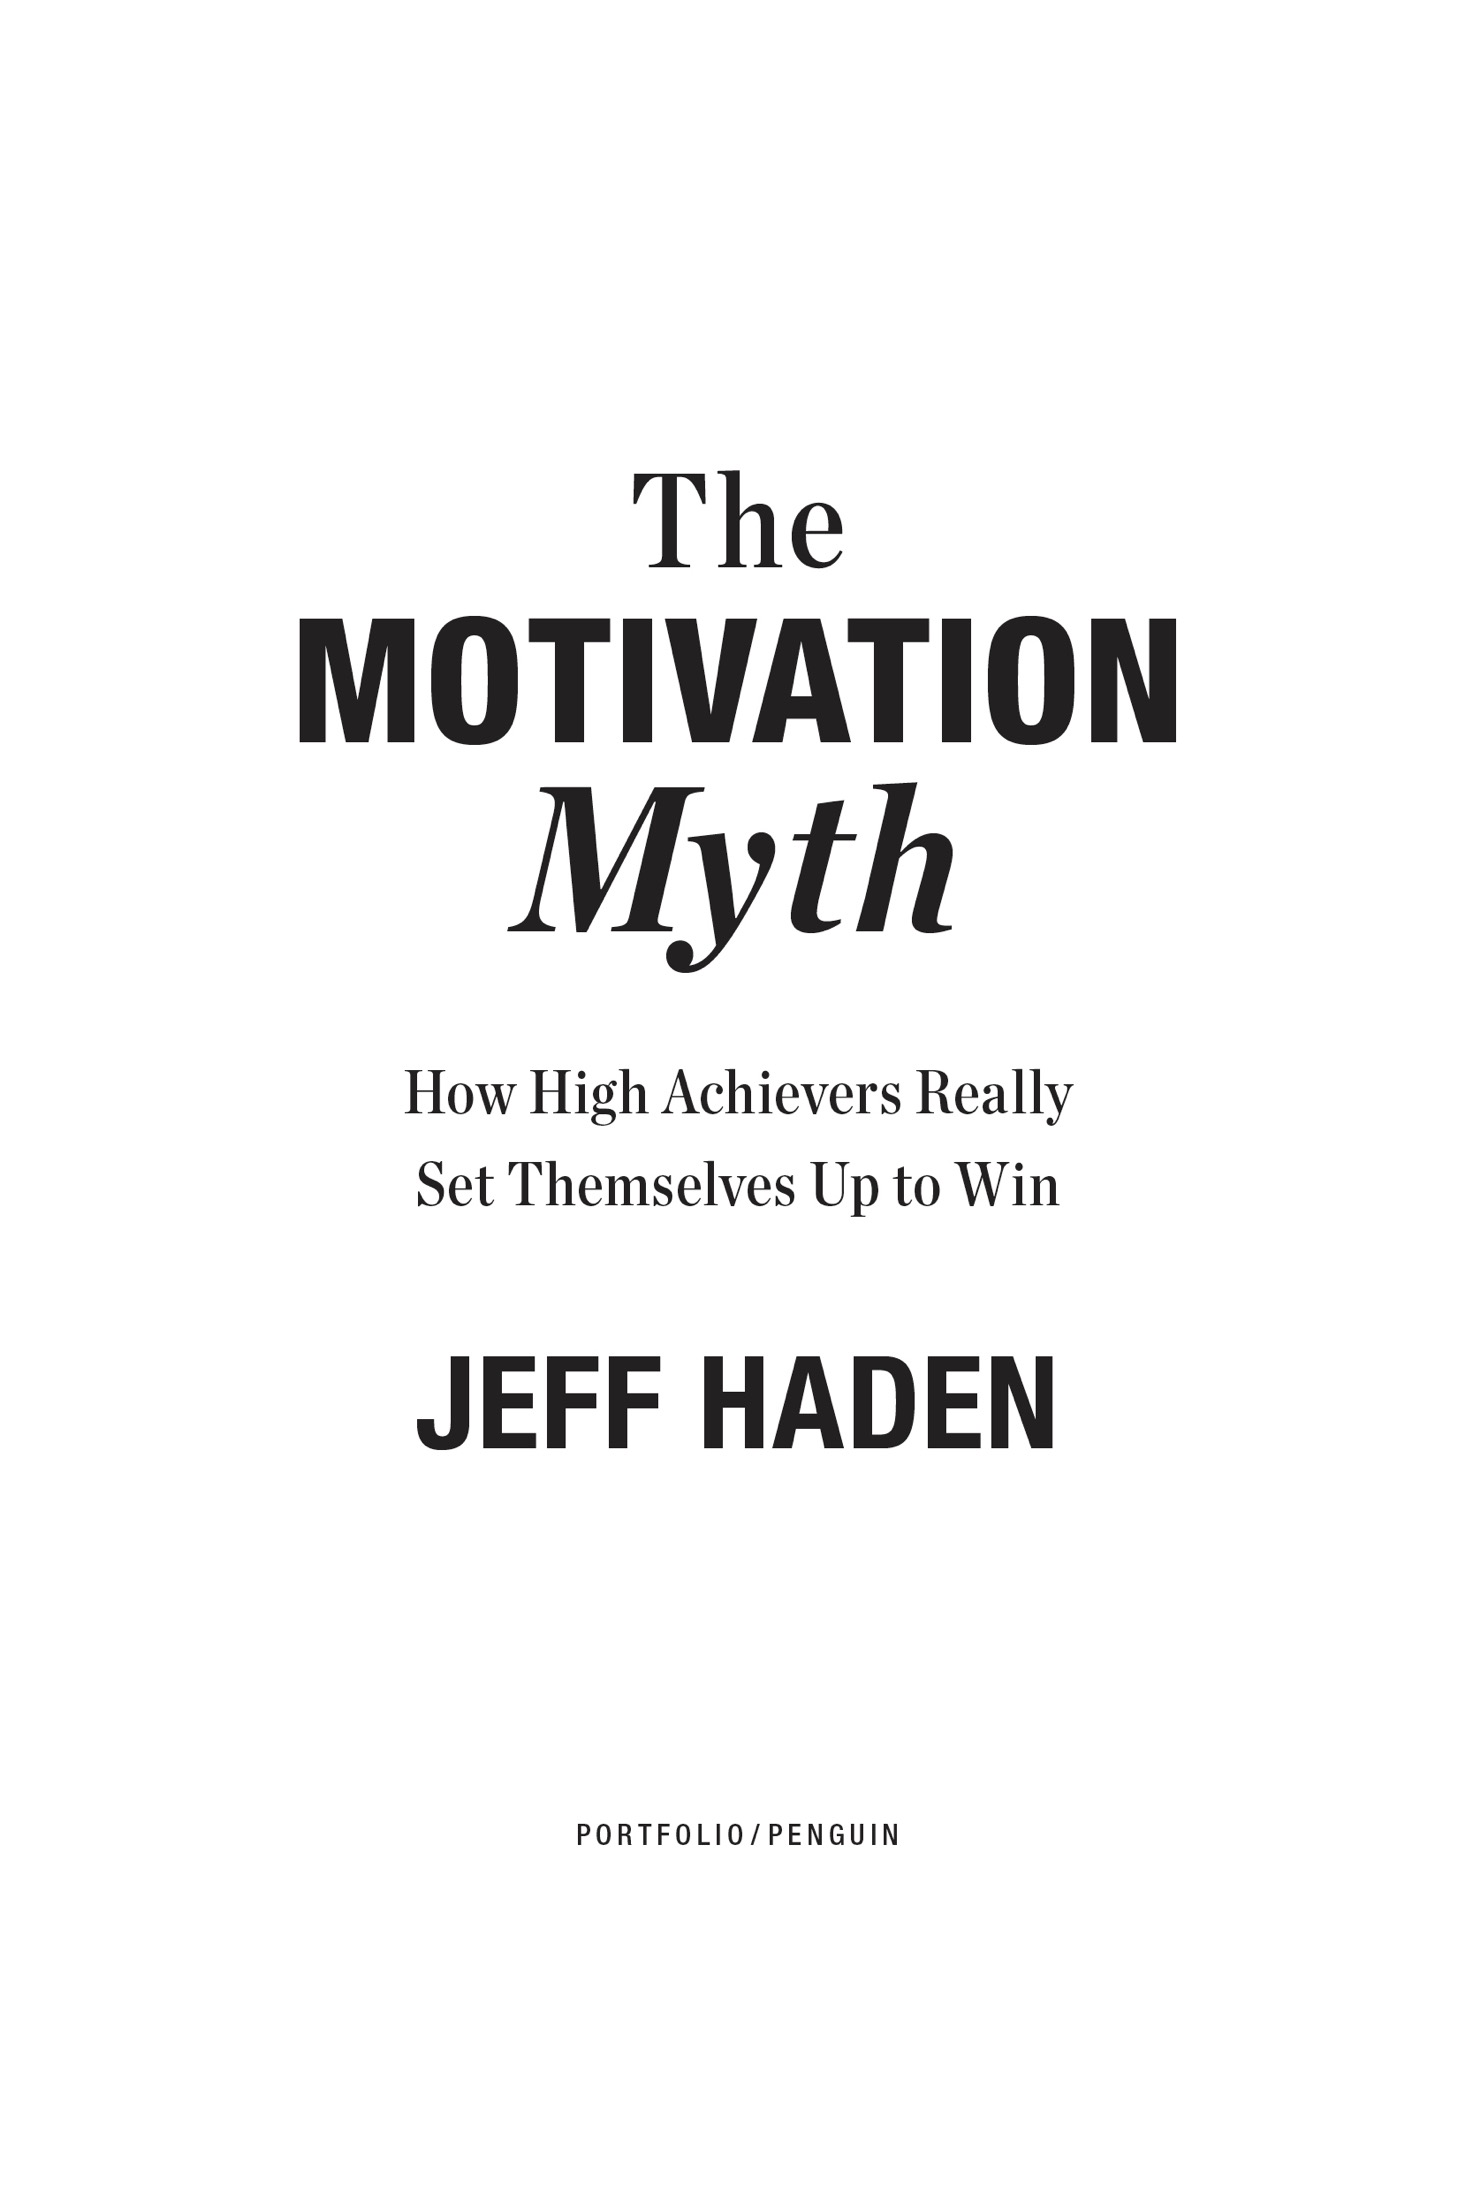 The motivation myth how high achievers really set themselves up to win - image 2